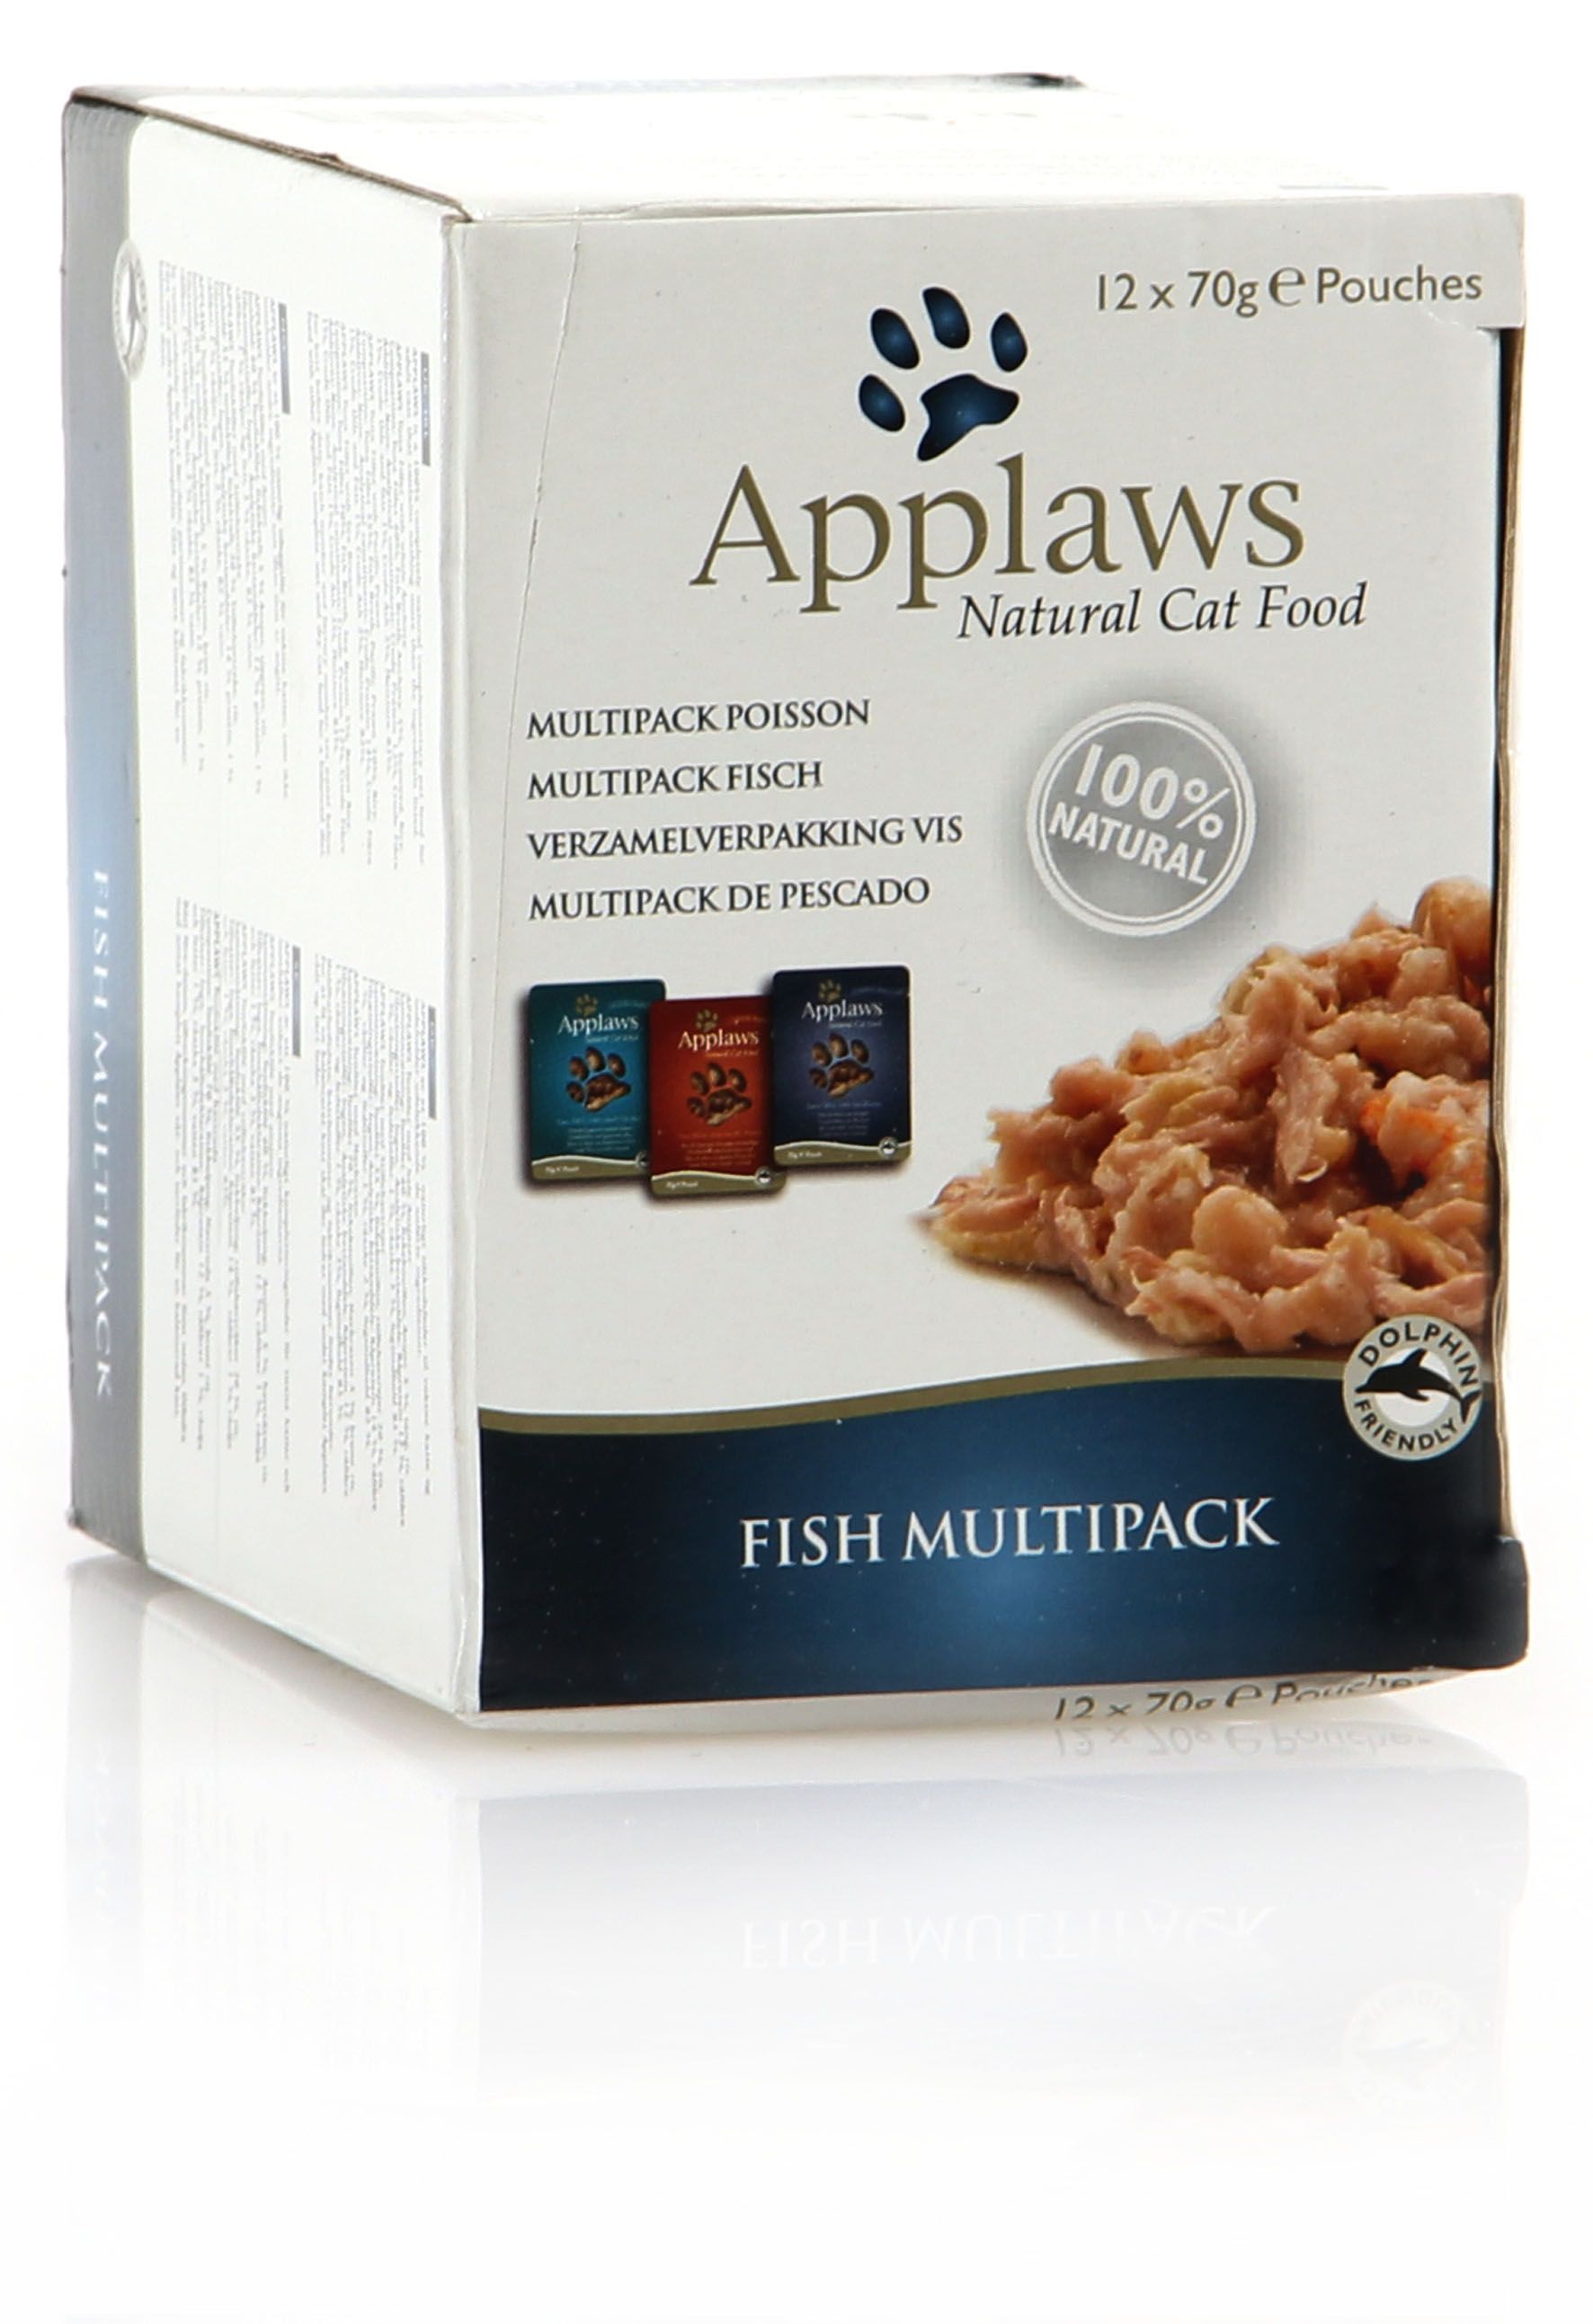 Applaws Multipack 12 x 70 g 